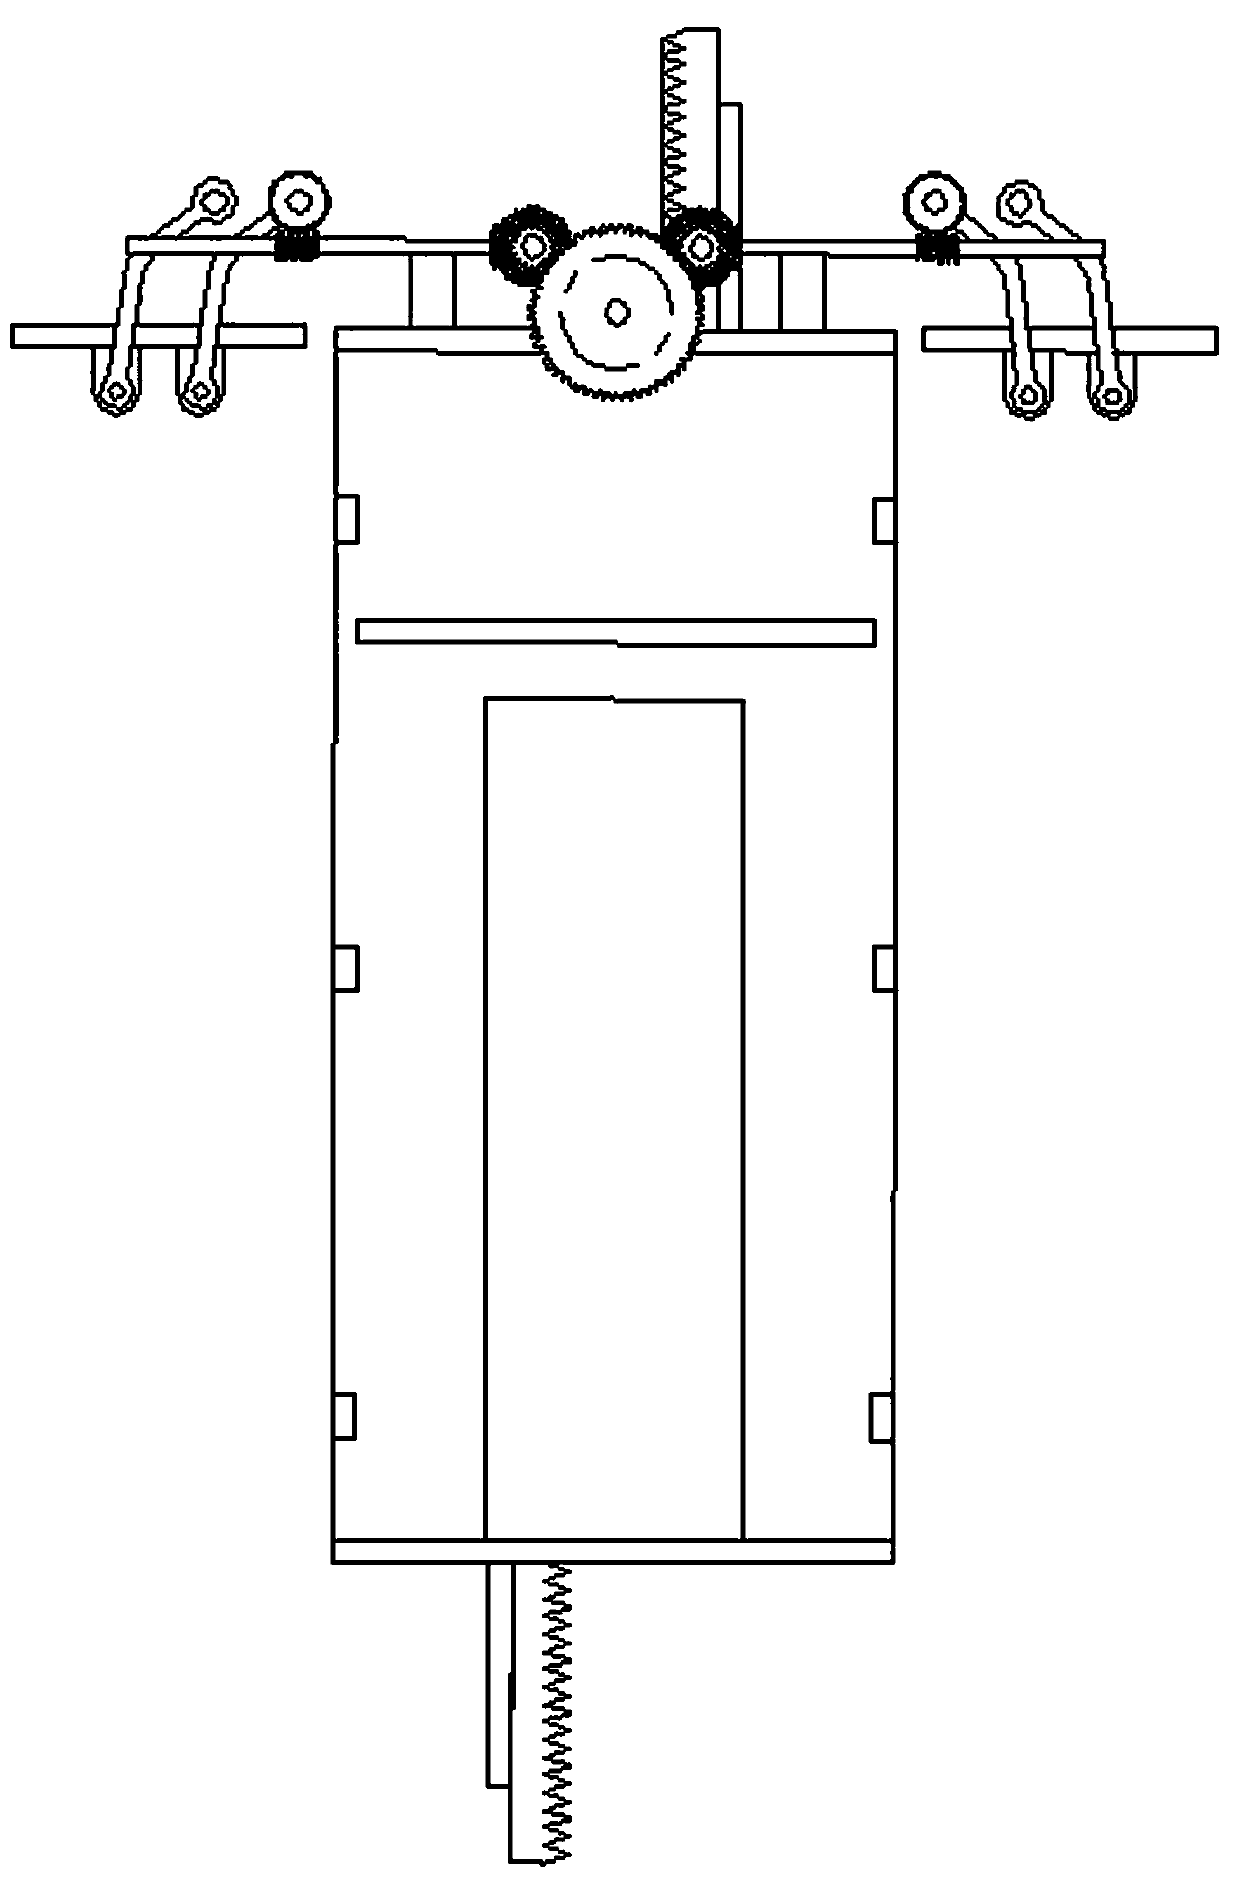 An Elevator Device Applicable to Renovation of Old Buildings